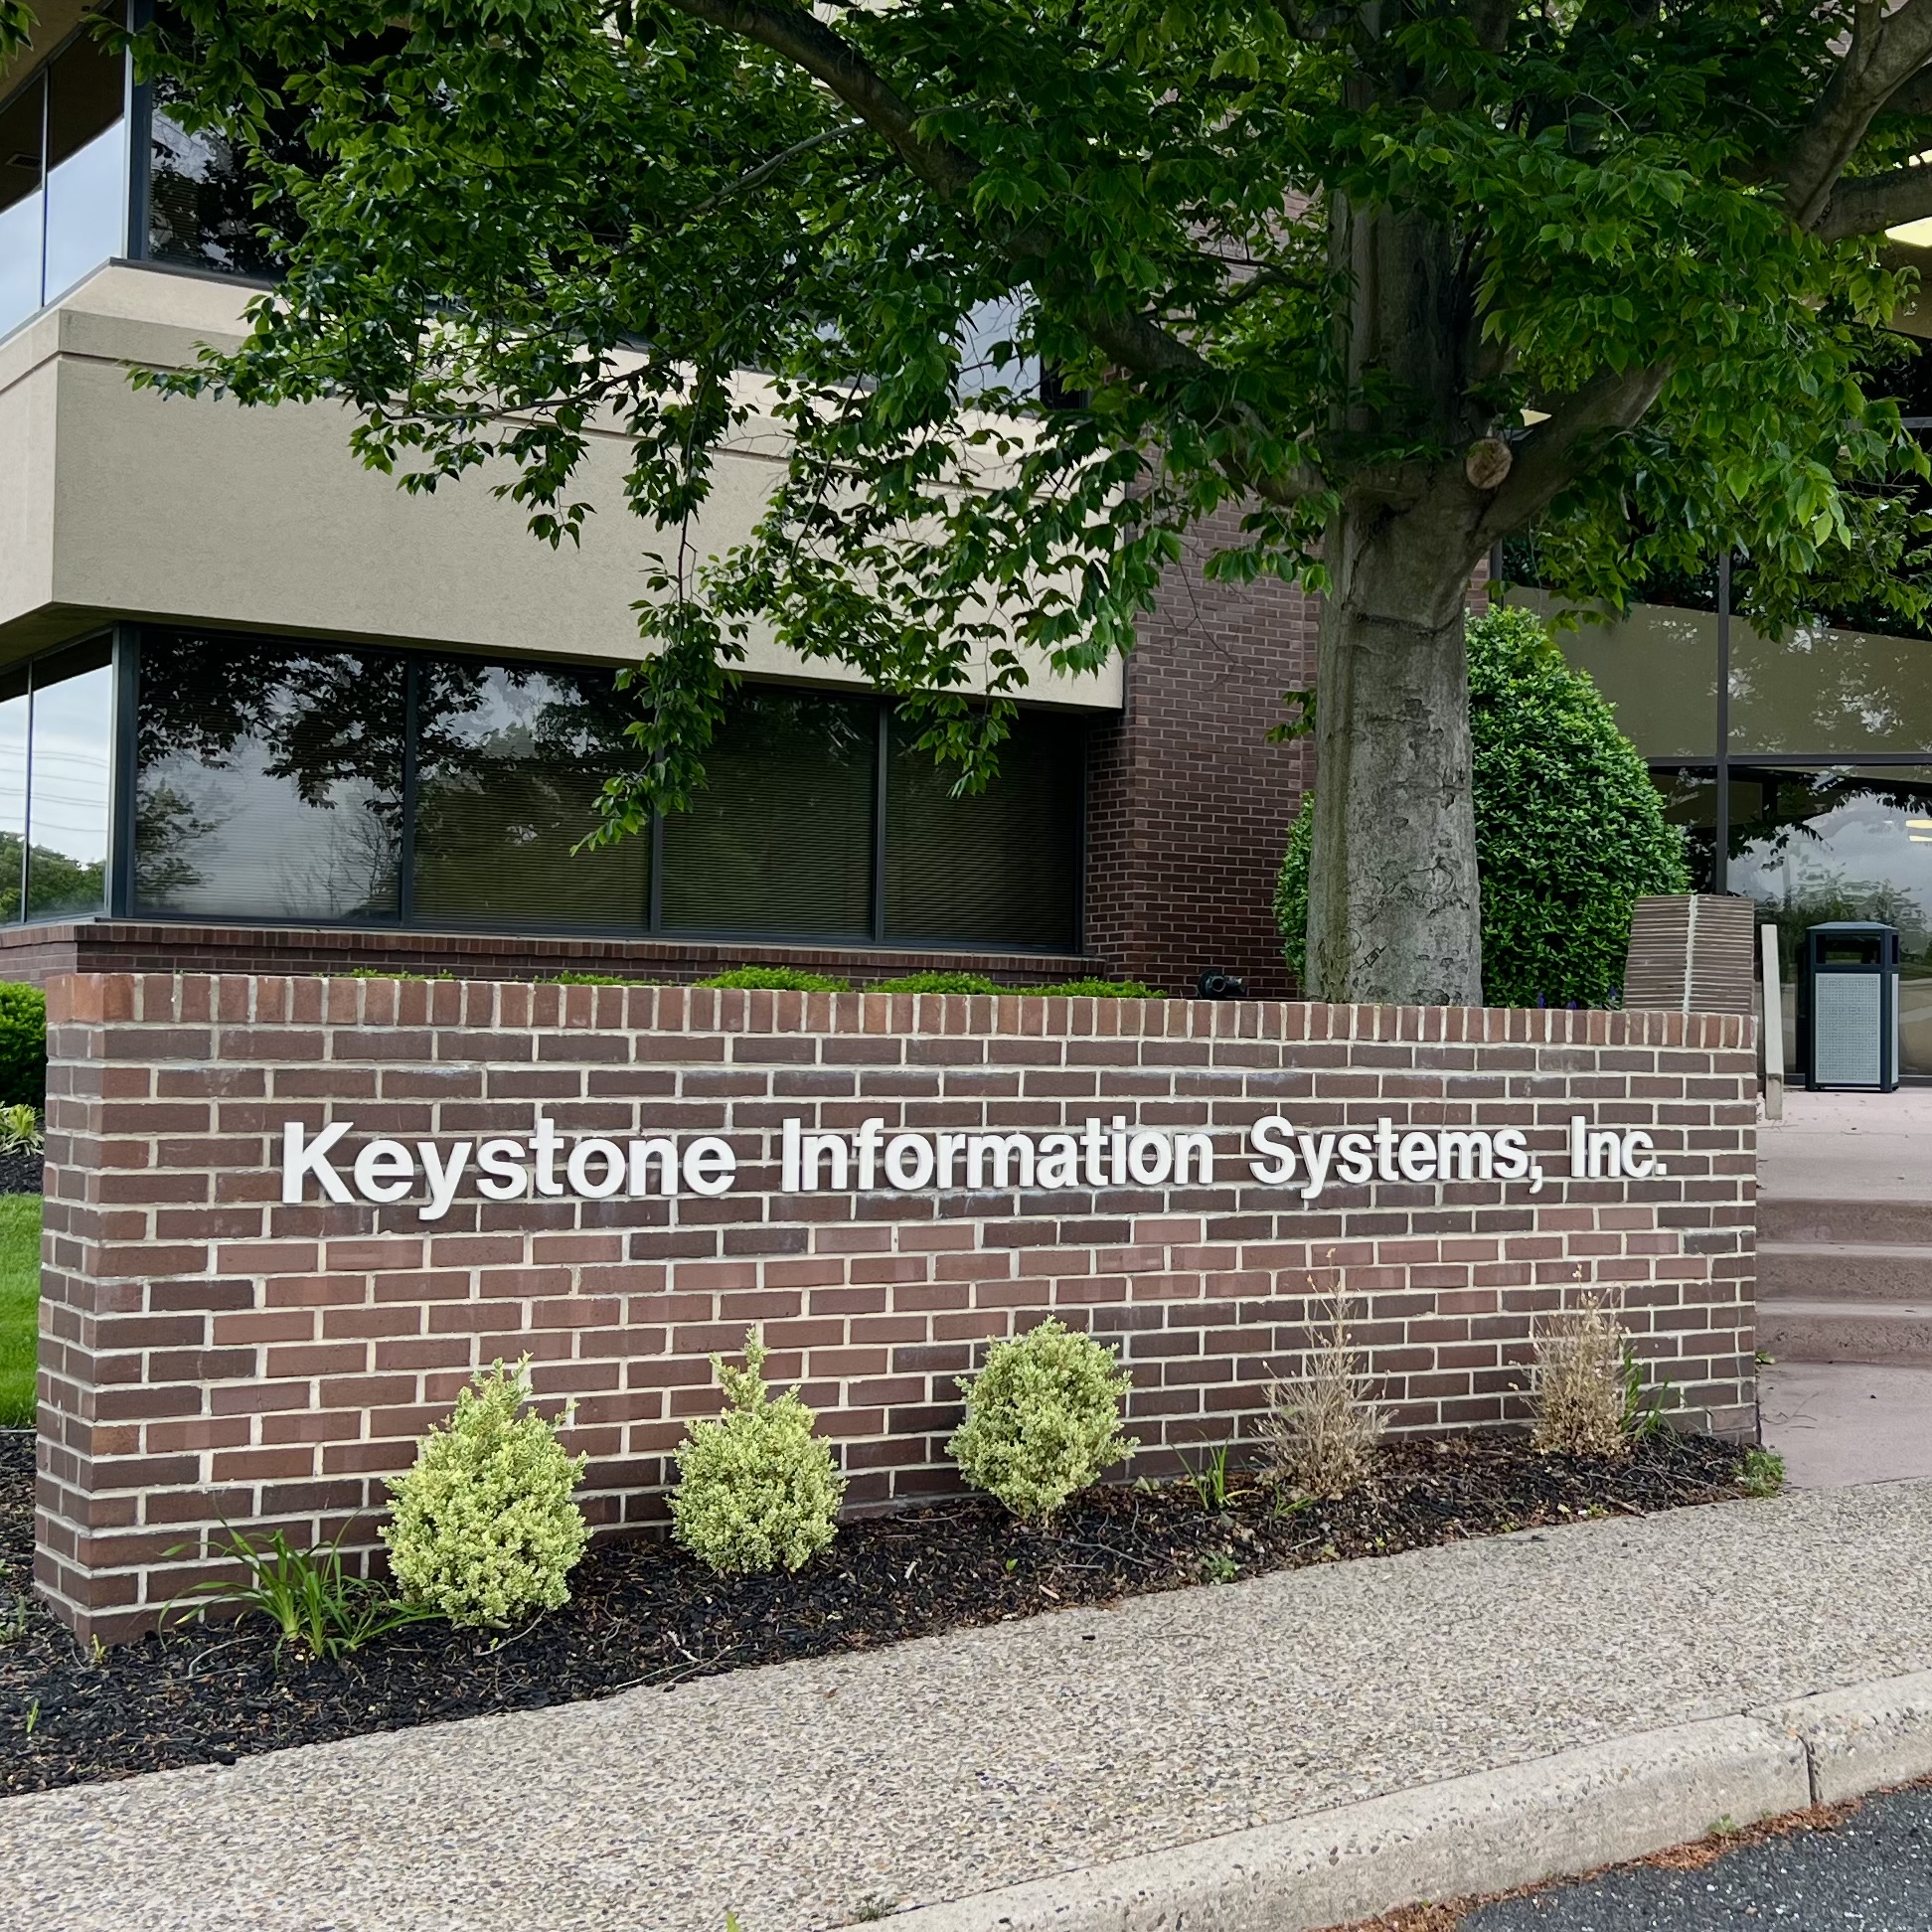 Keystone Information Systems Front Building Image